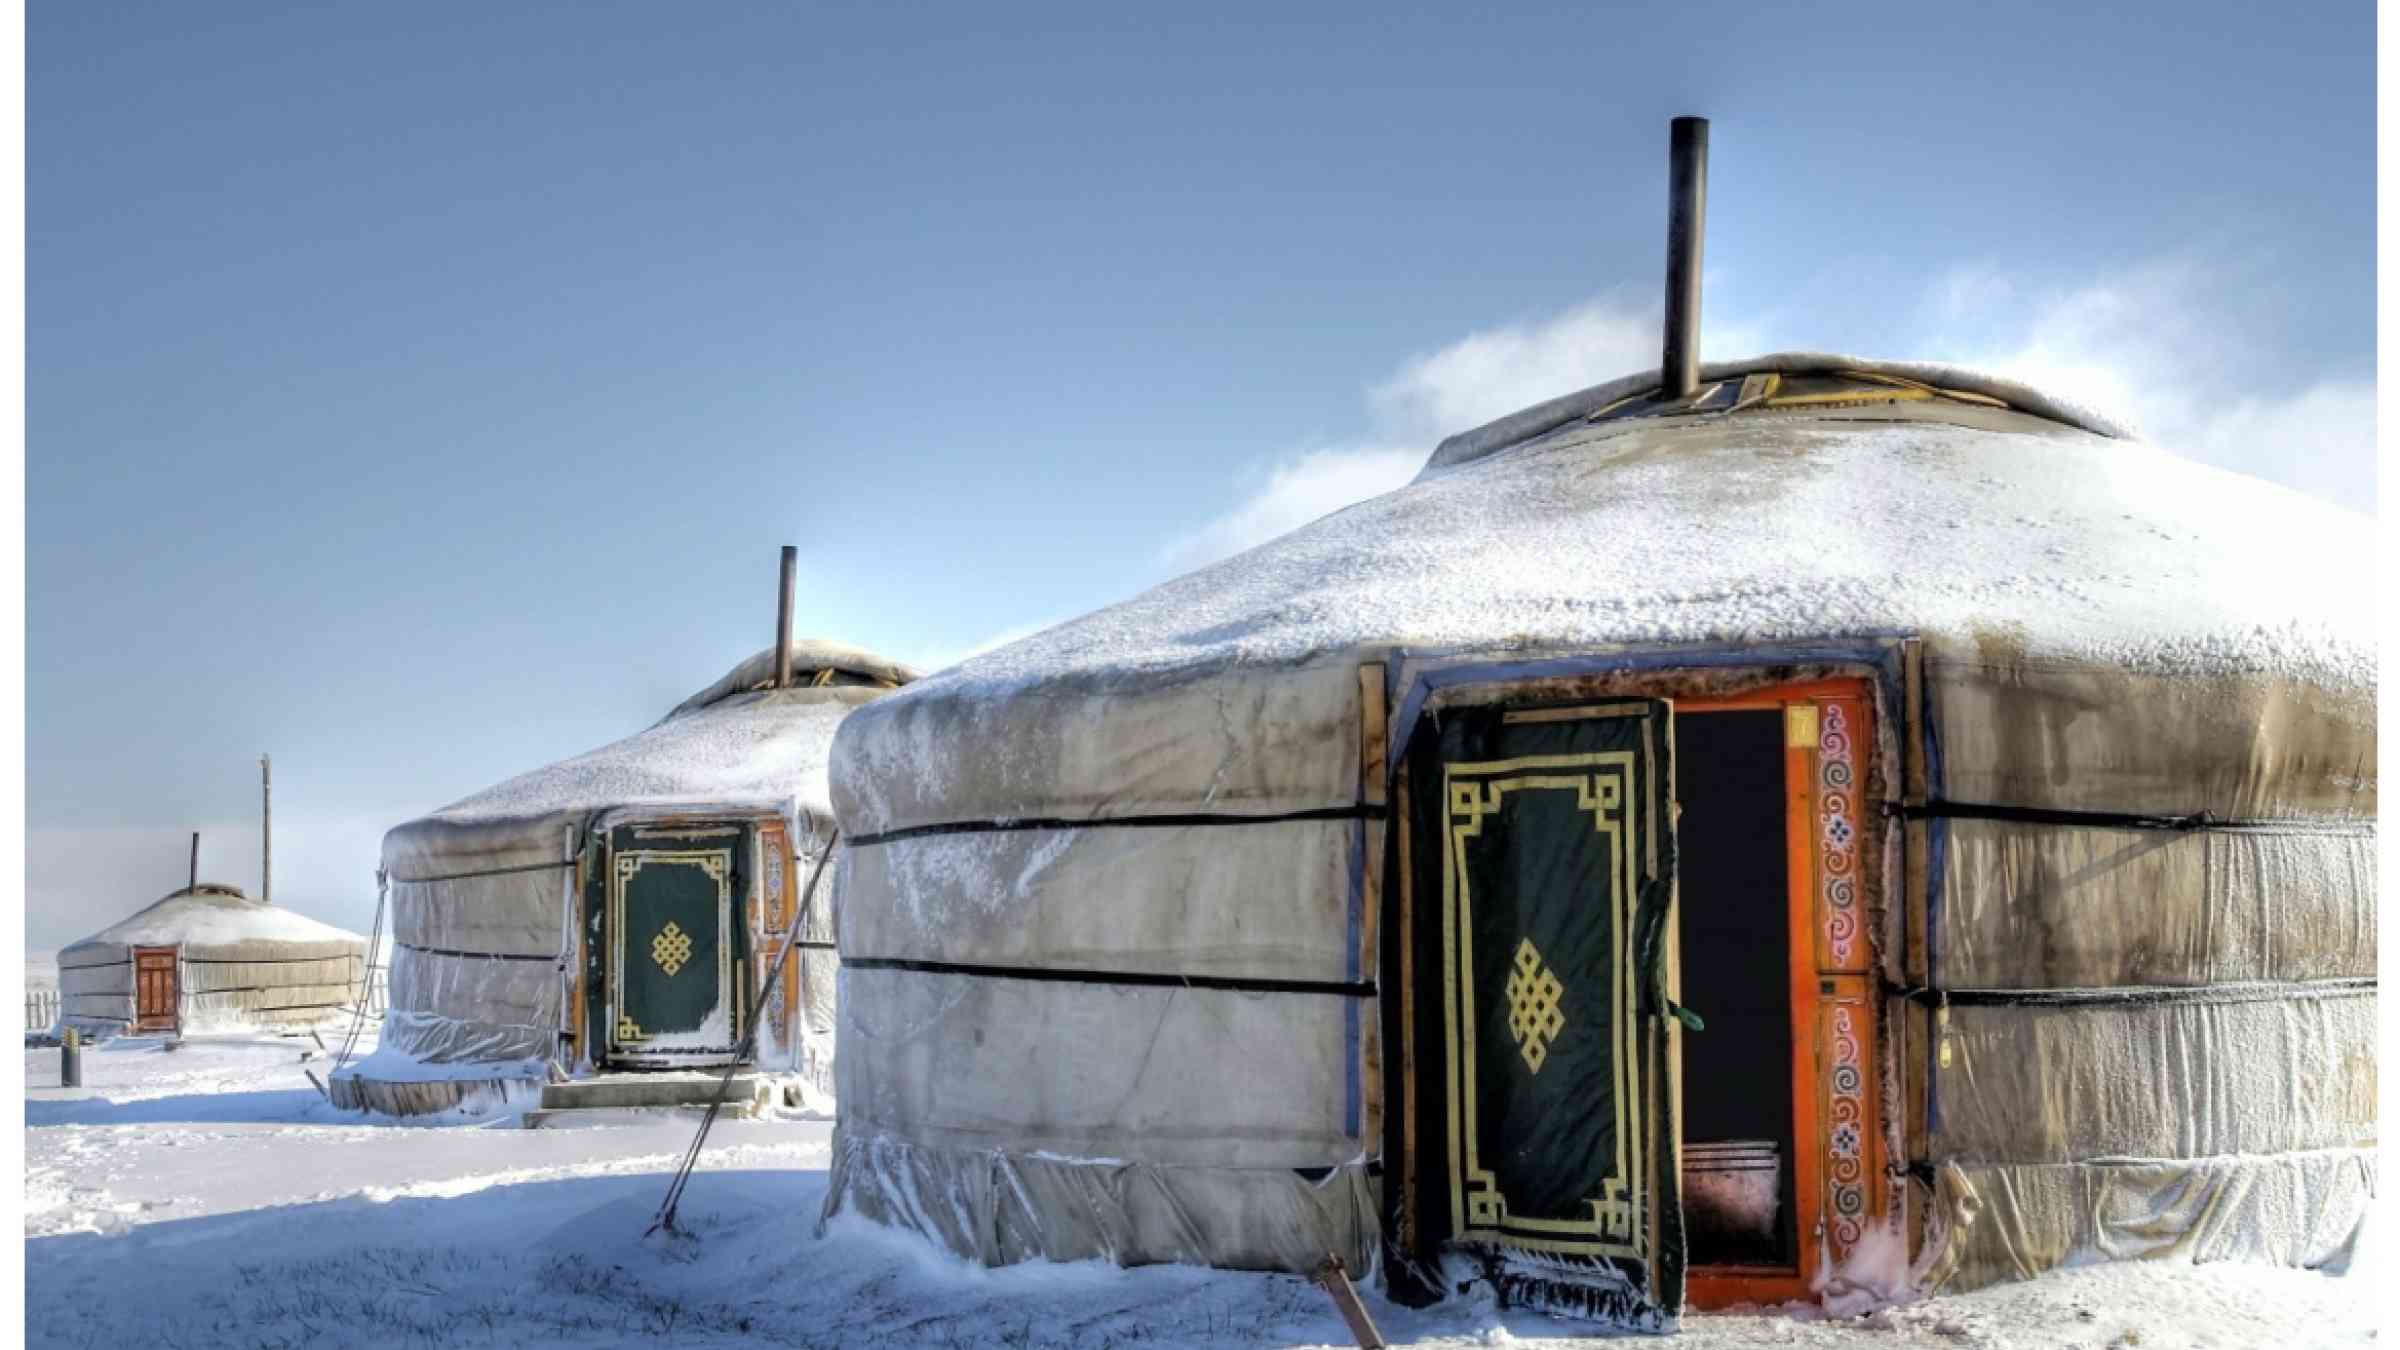 Mongolia yurts in the snow